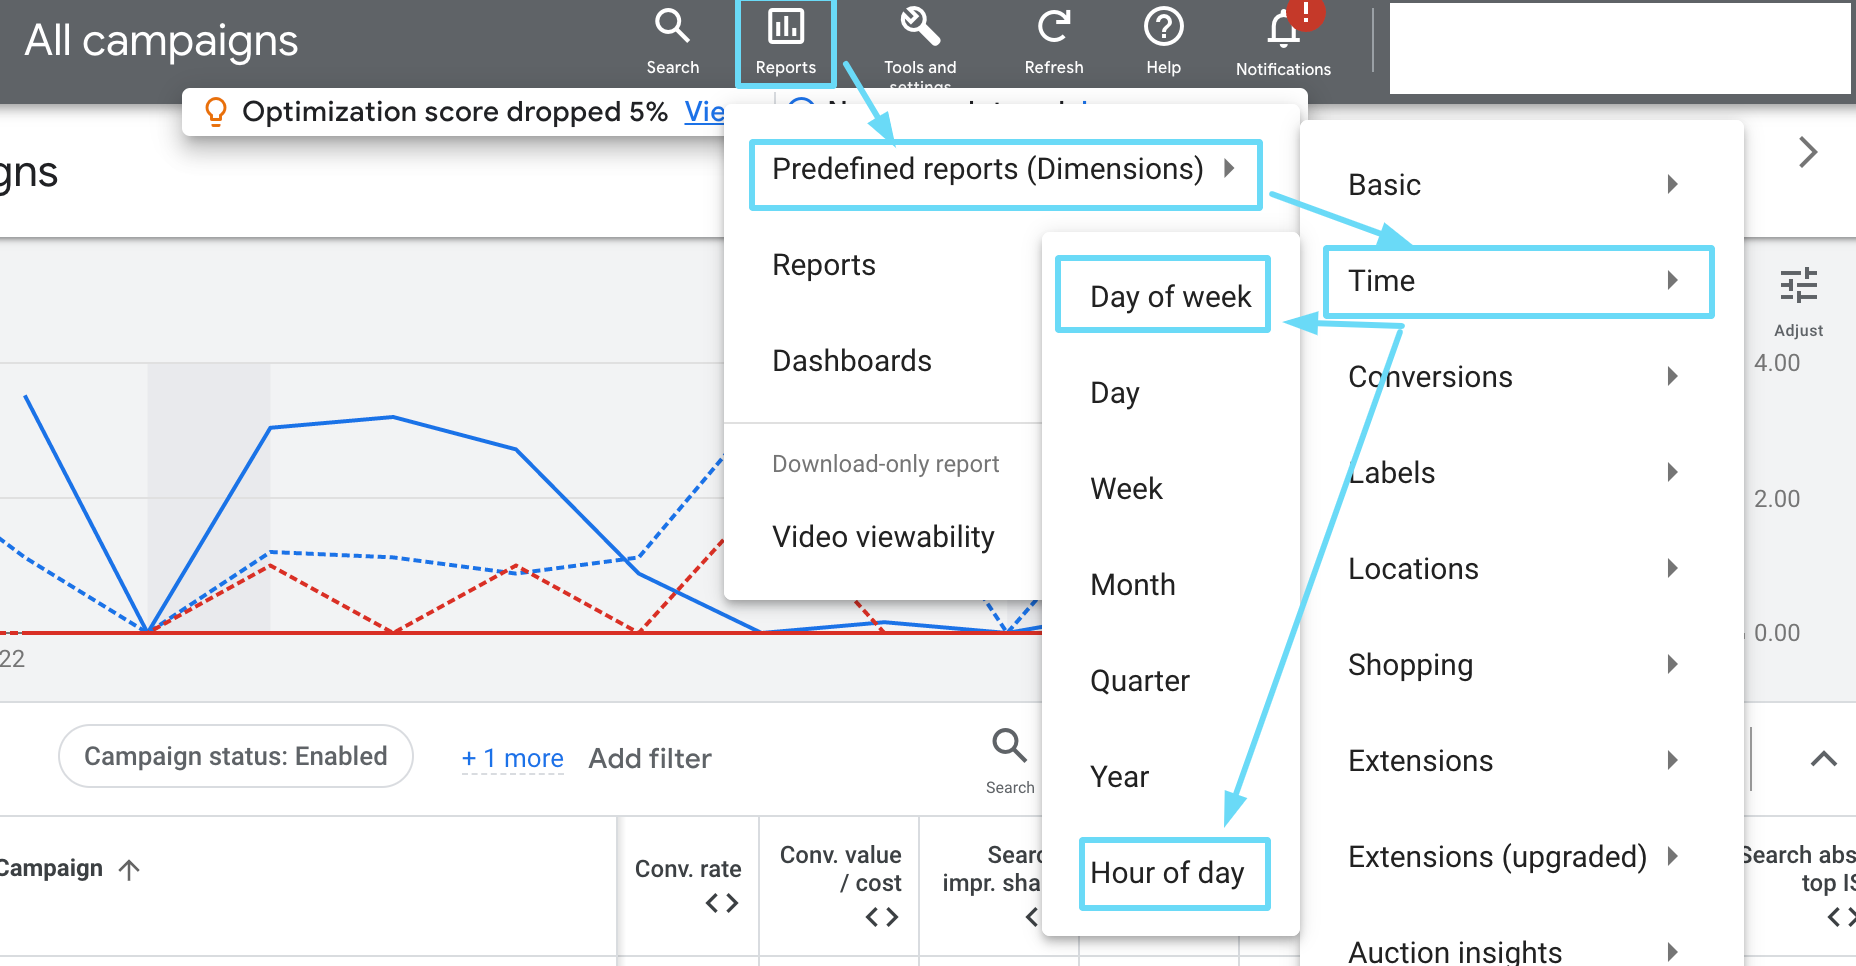 Day of week and Hour of day reports for Google search ads